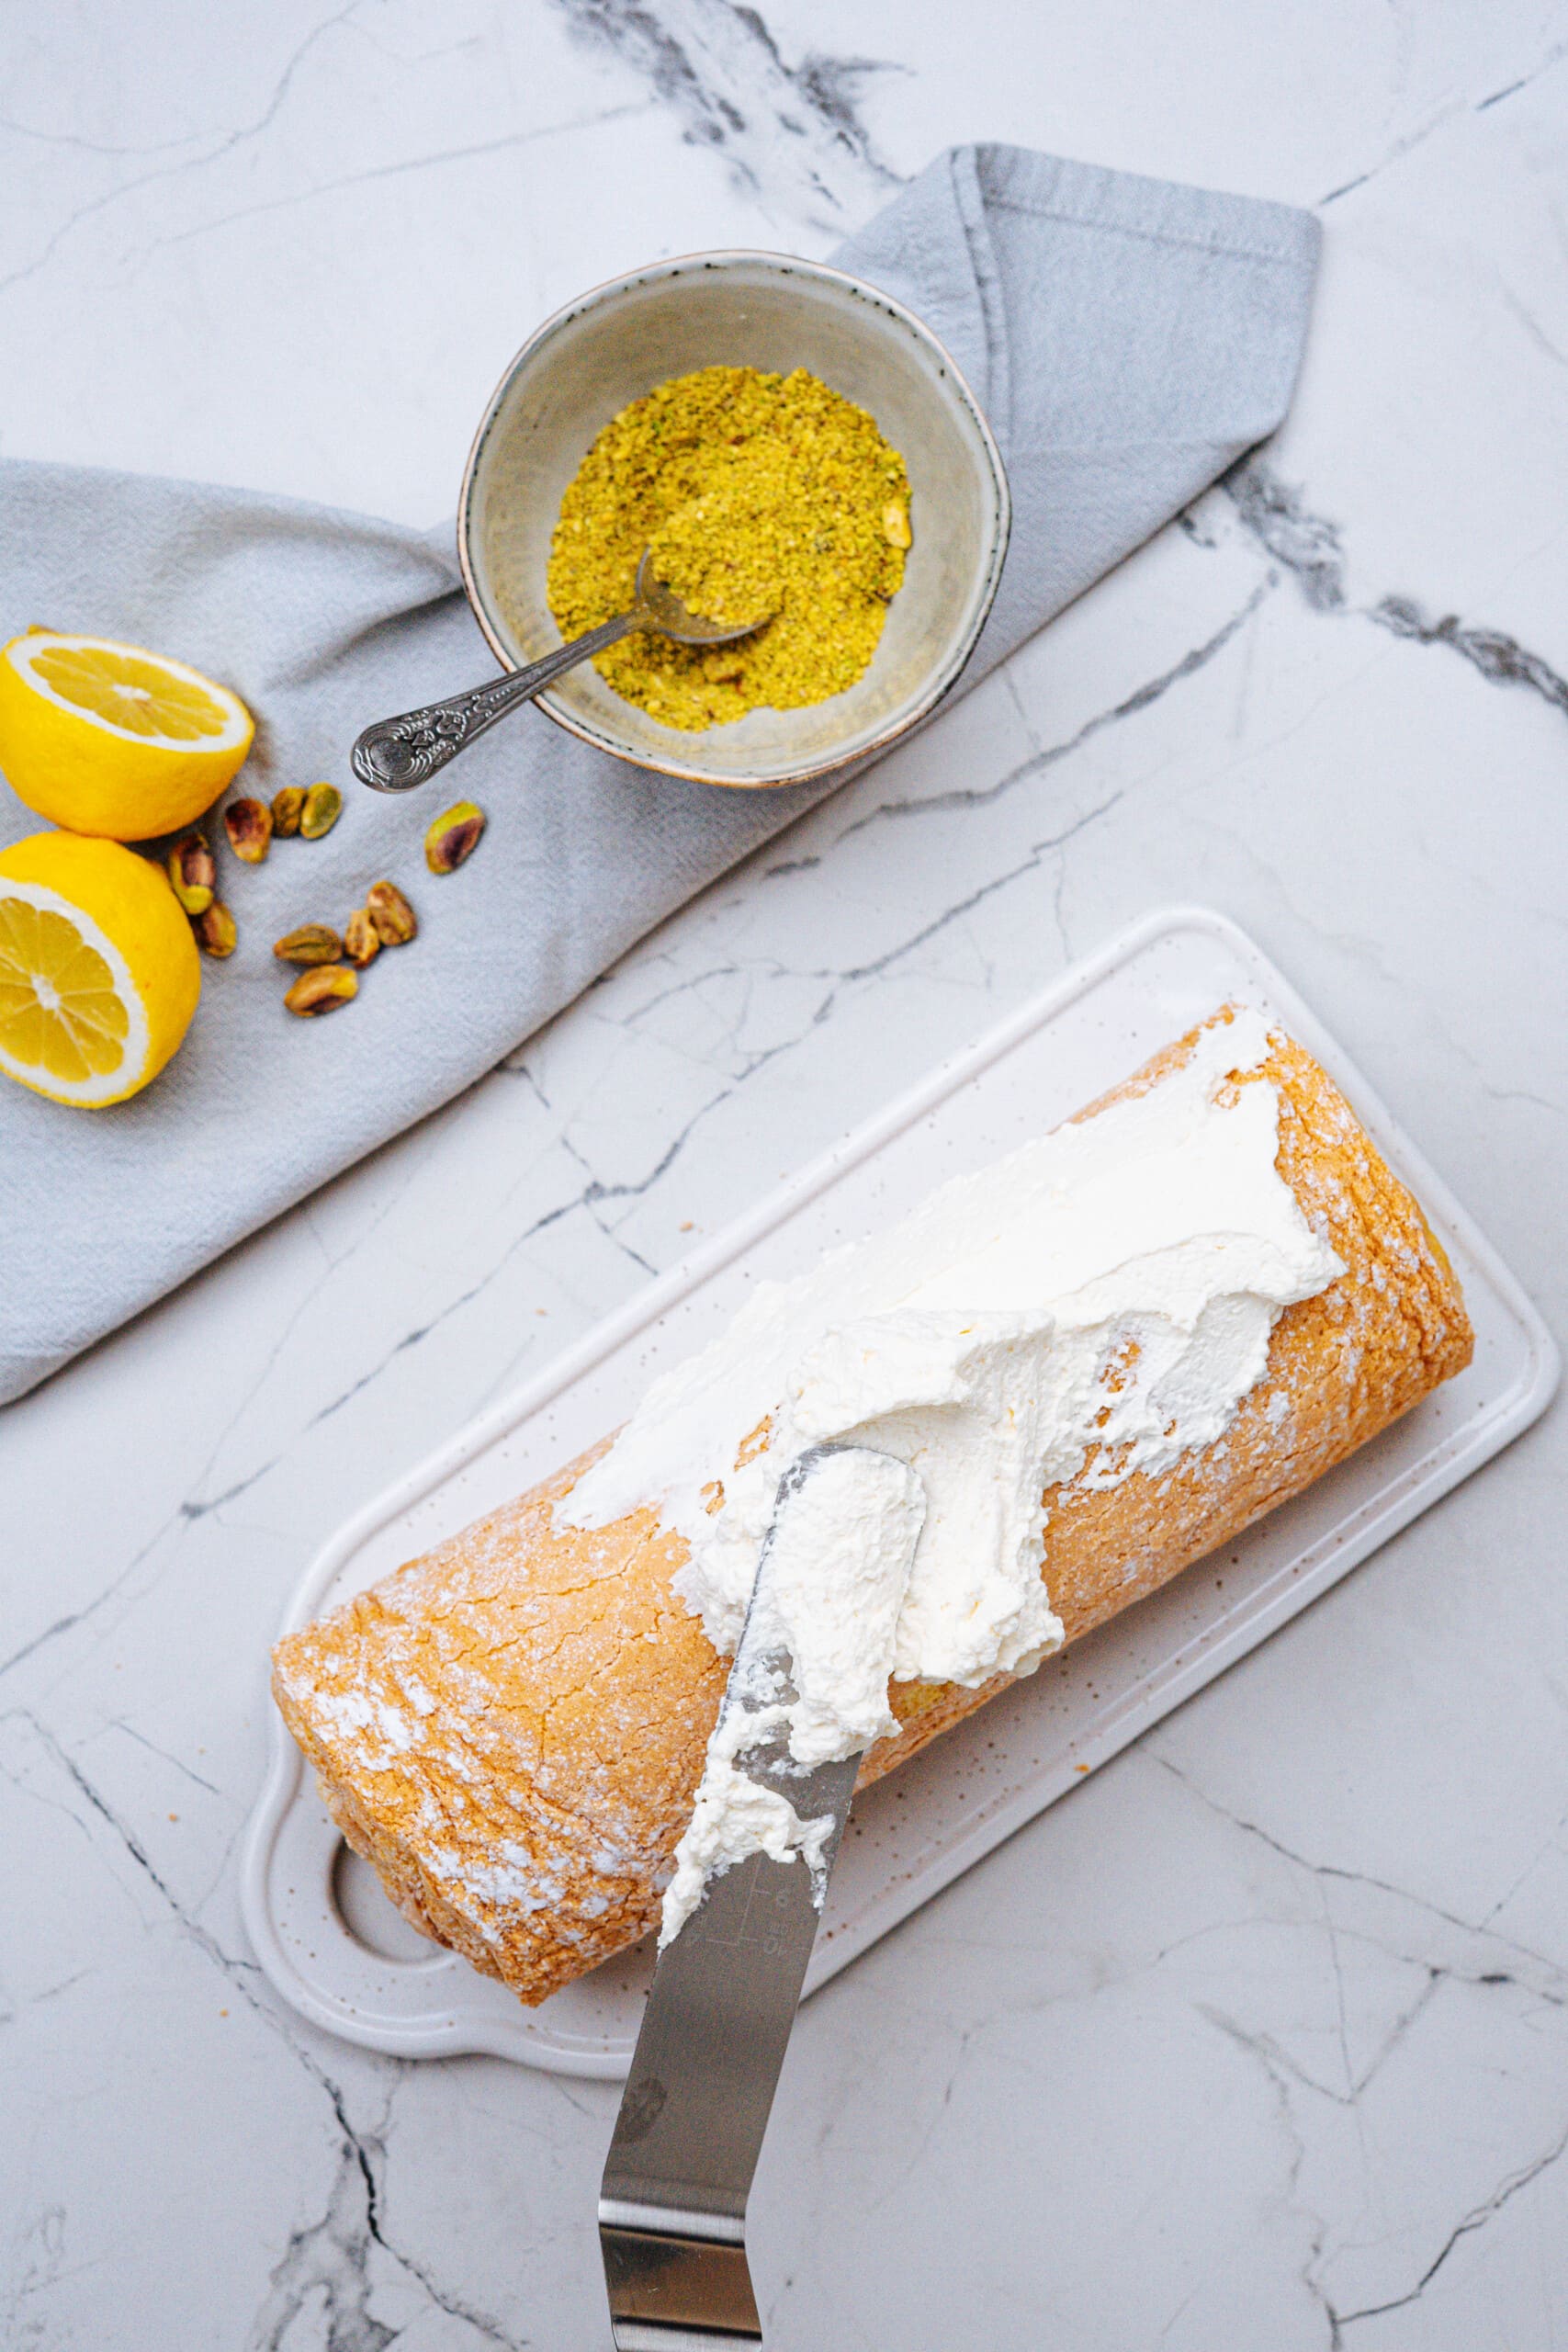 whipped topping being spread over the outside of pistachio lemon roll cake